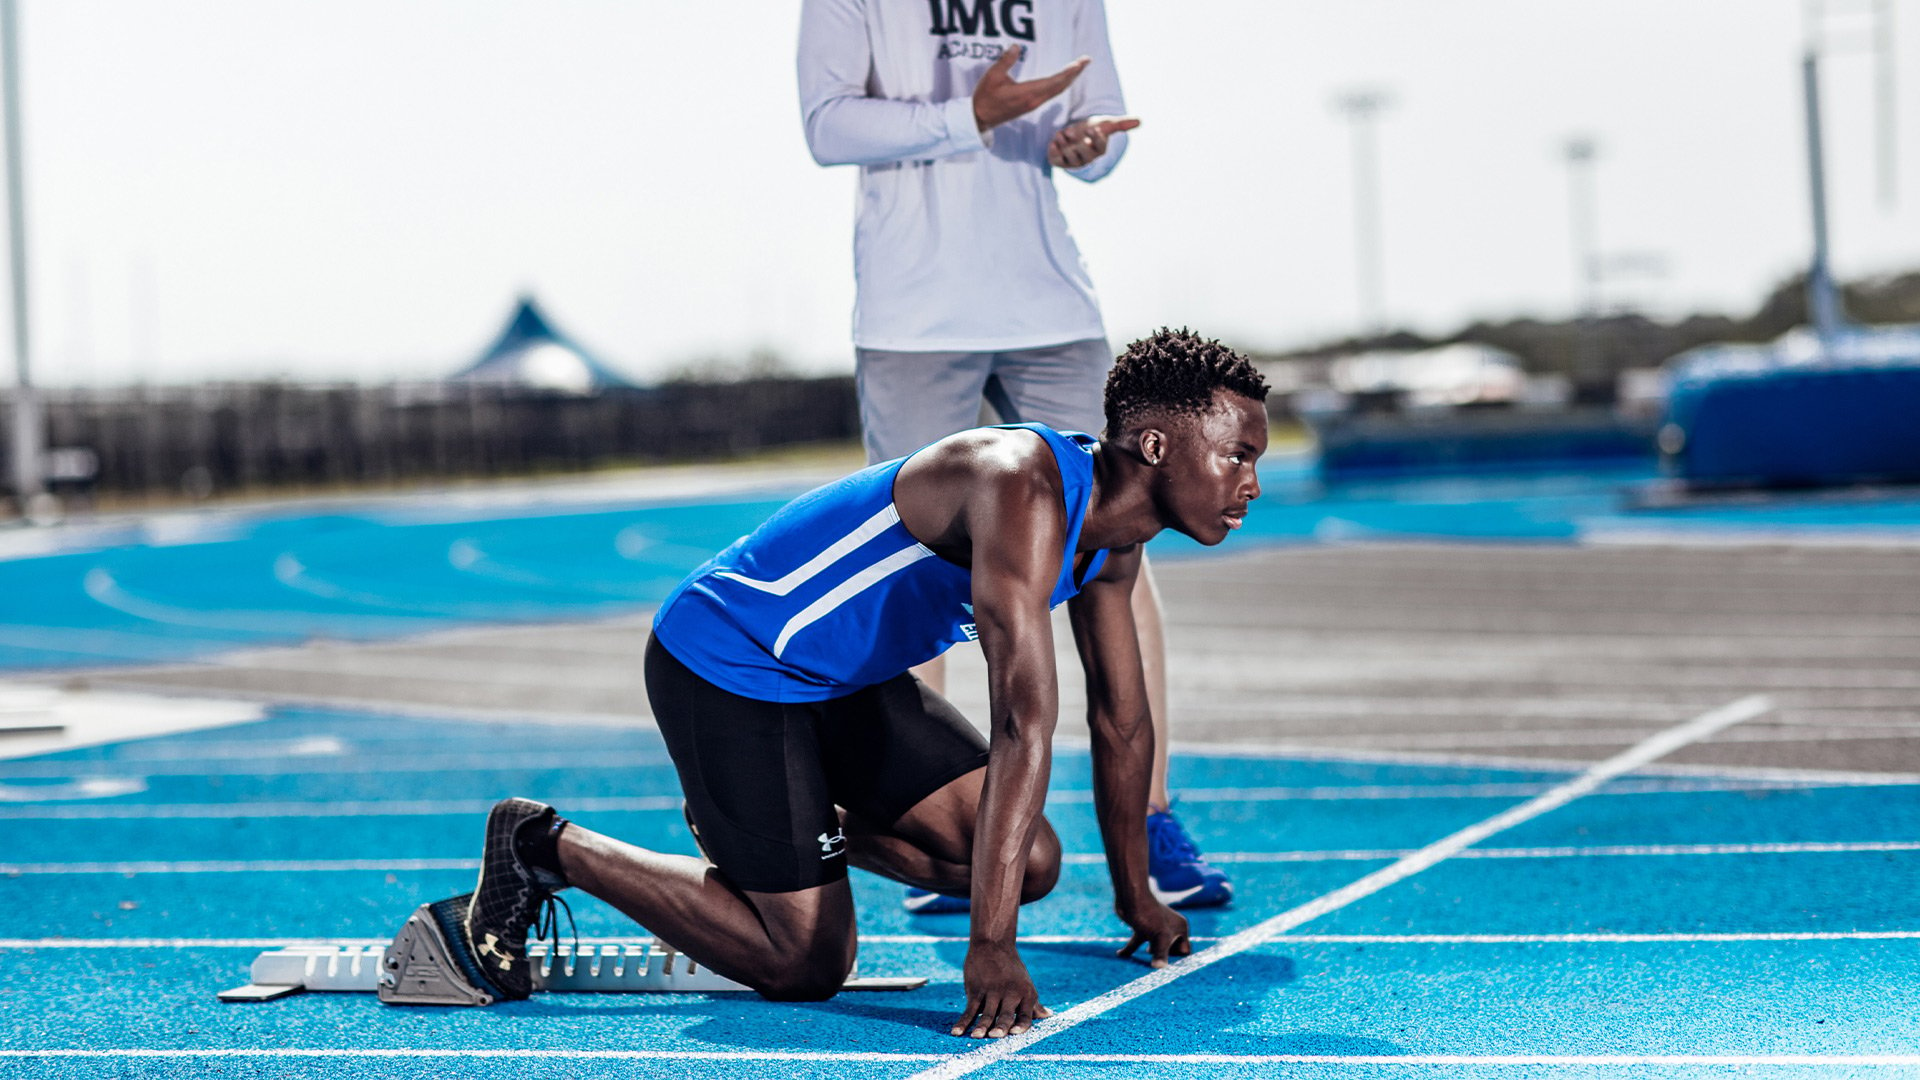 11 Reasons for All Athletes to Join the Track and Field Team